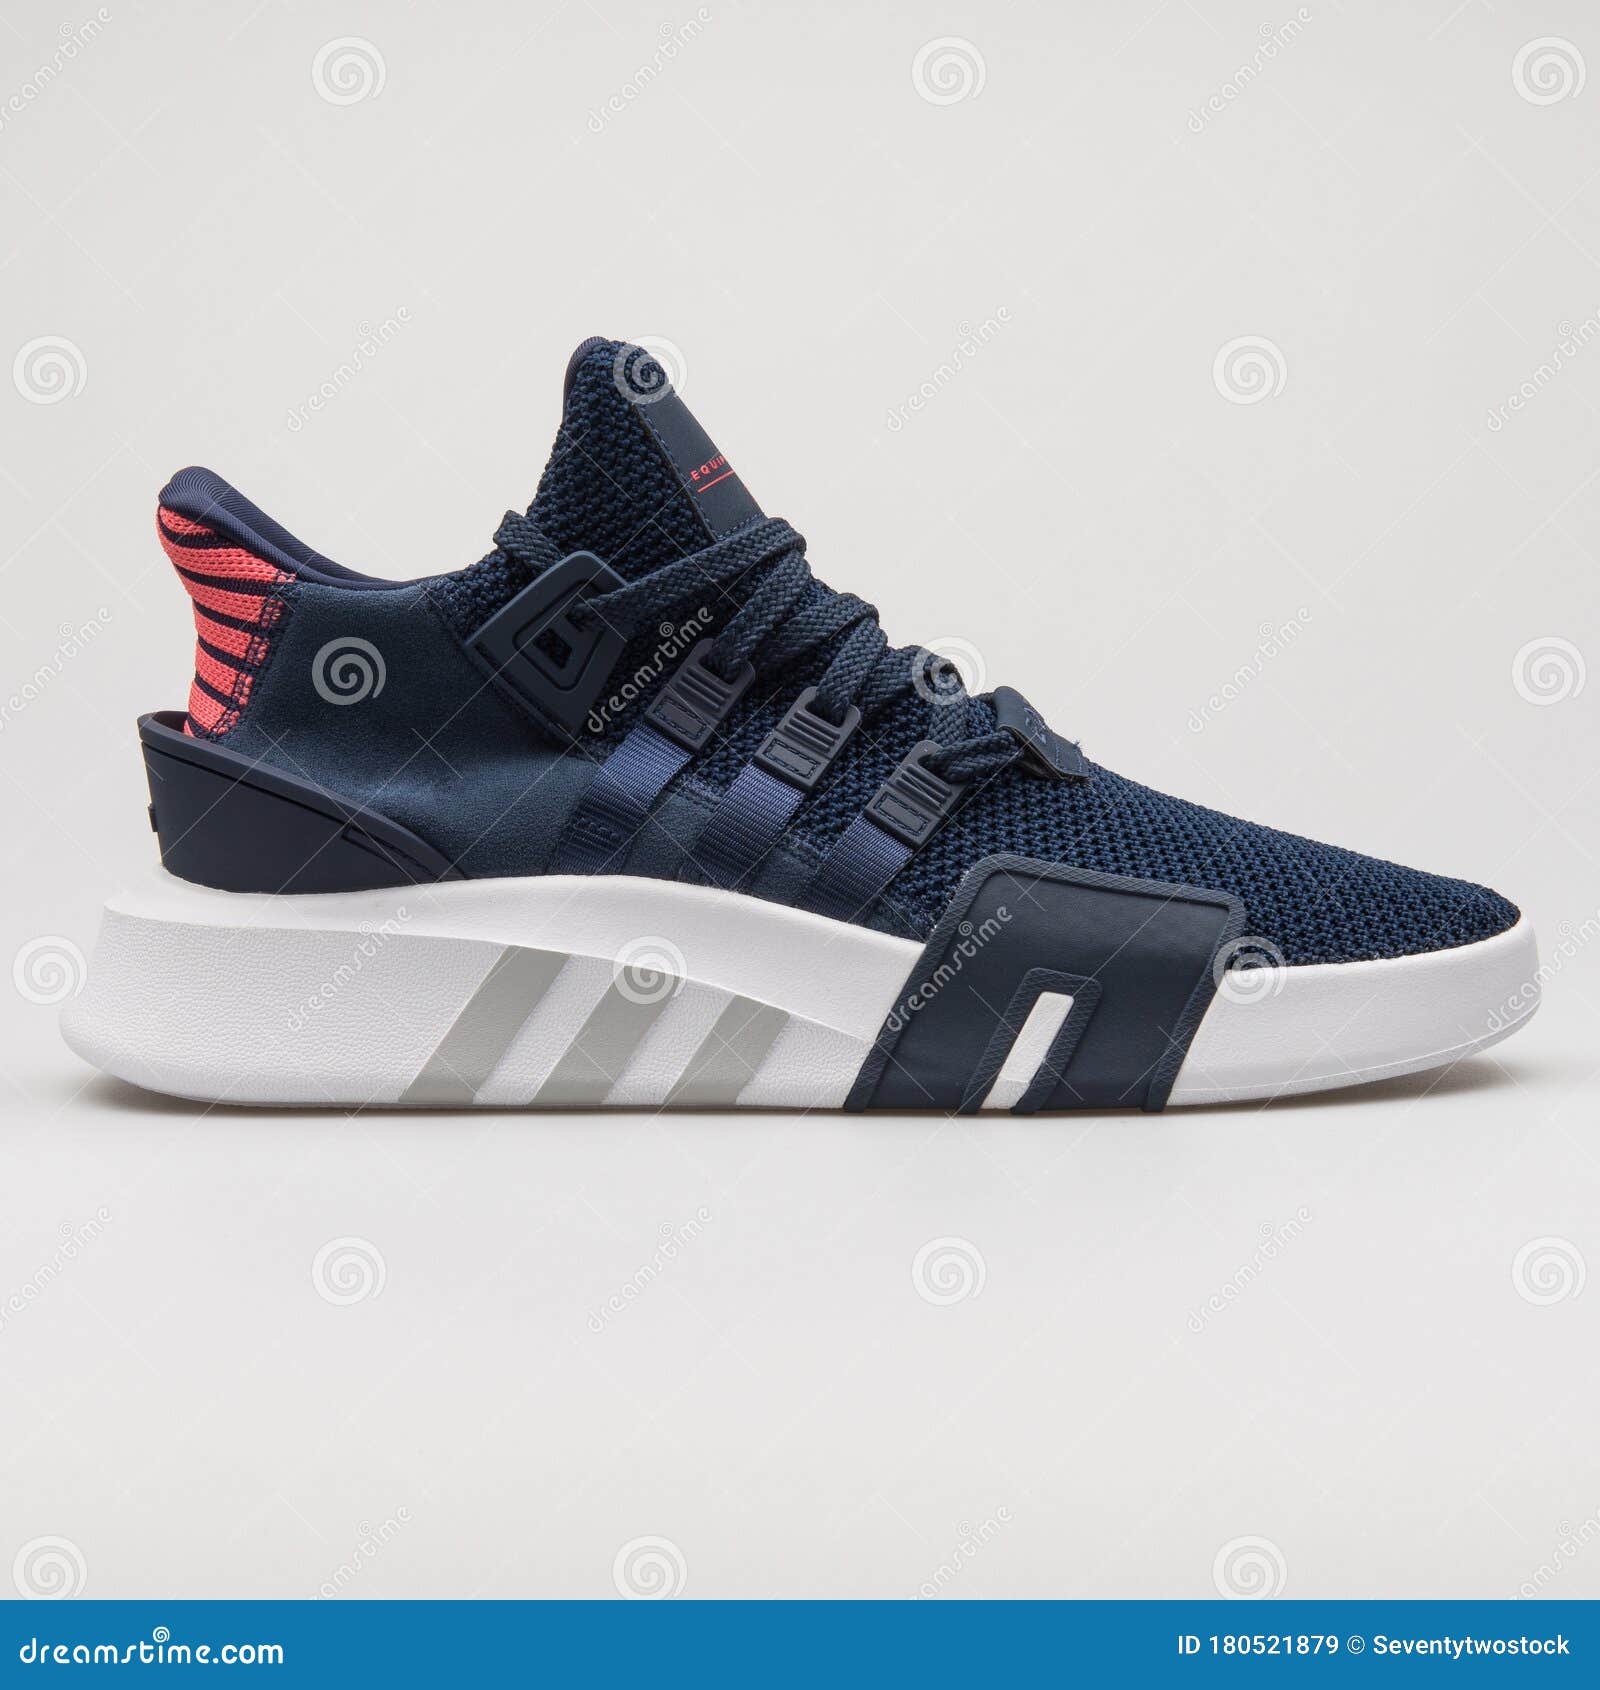 EQT Navy Blue and White Sneaker Stock Image - Image of kicks, color: 180521879